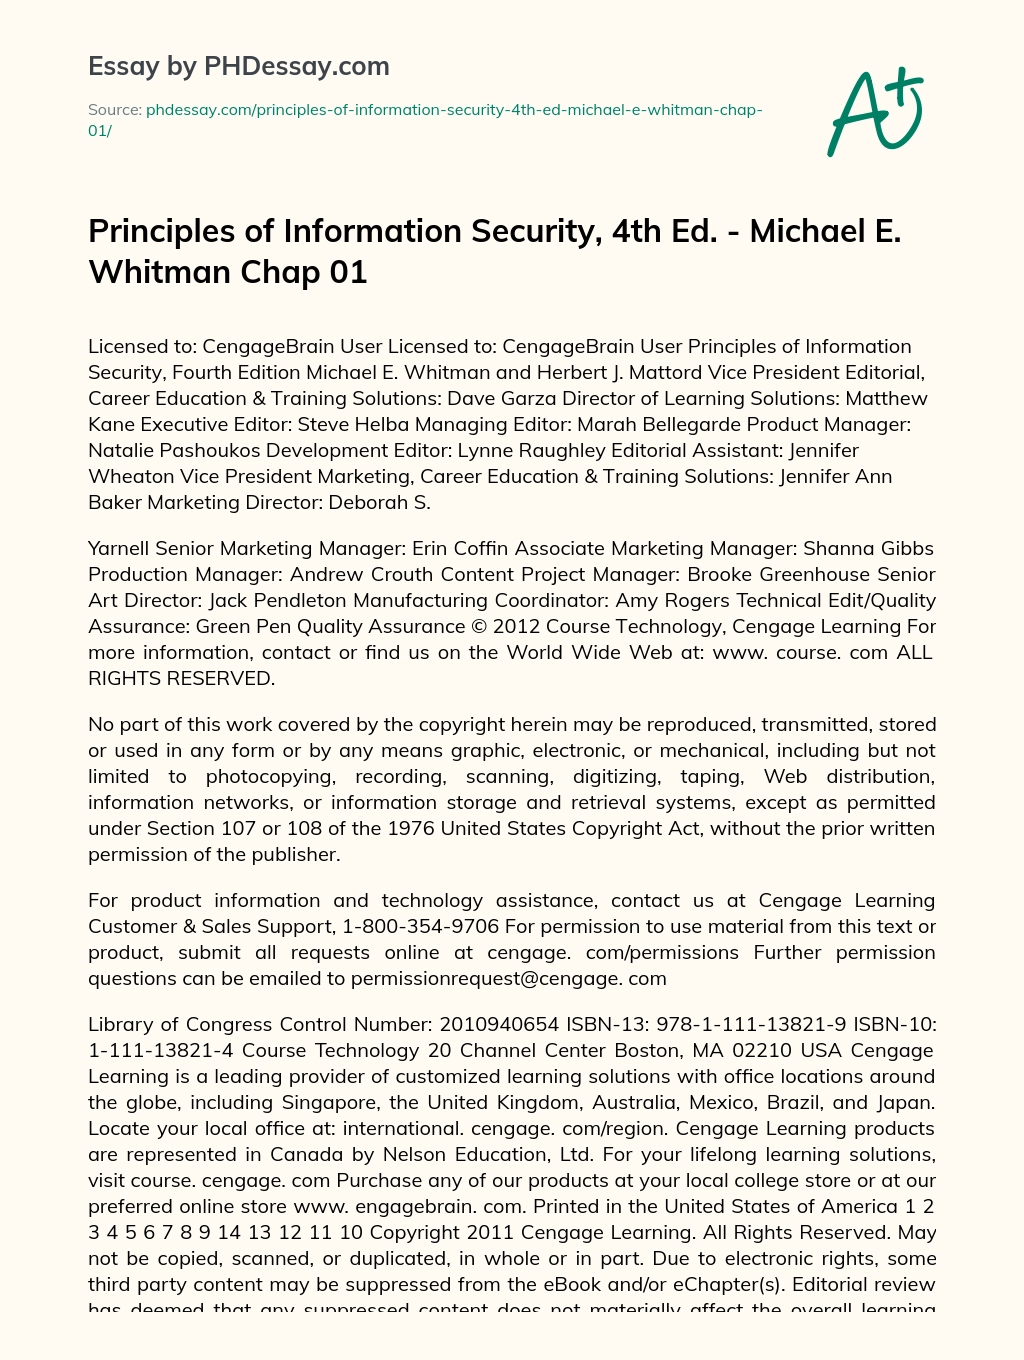 Principles of Information Security, 4th Ed. – Michael E. Whitman Chap 01 essay